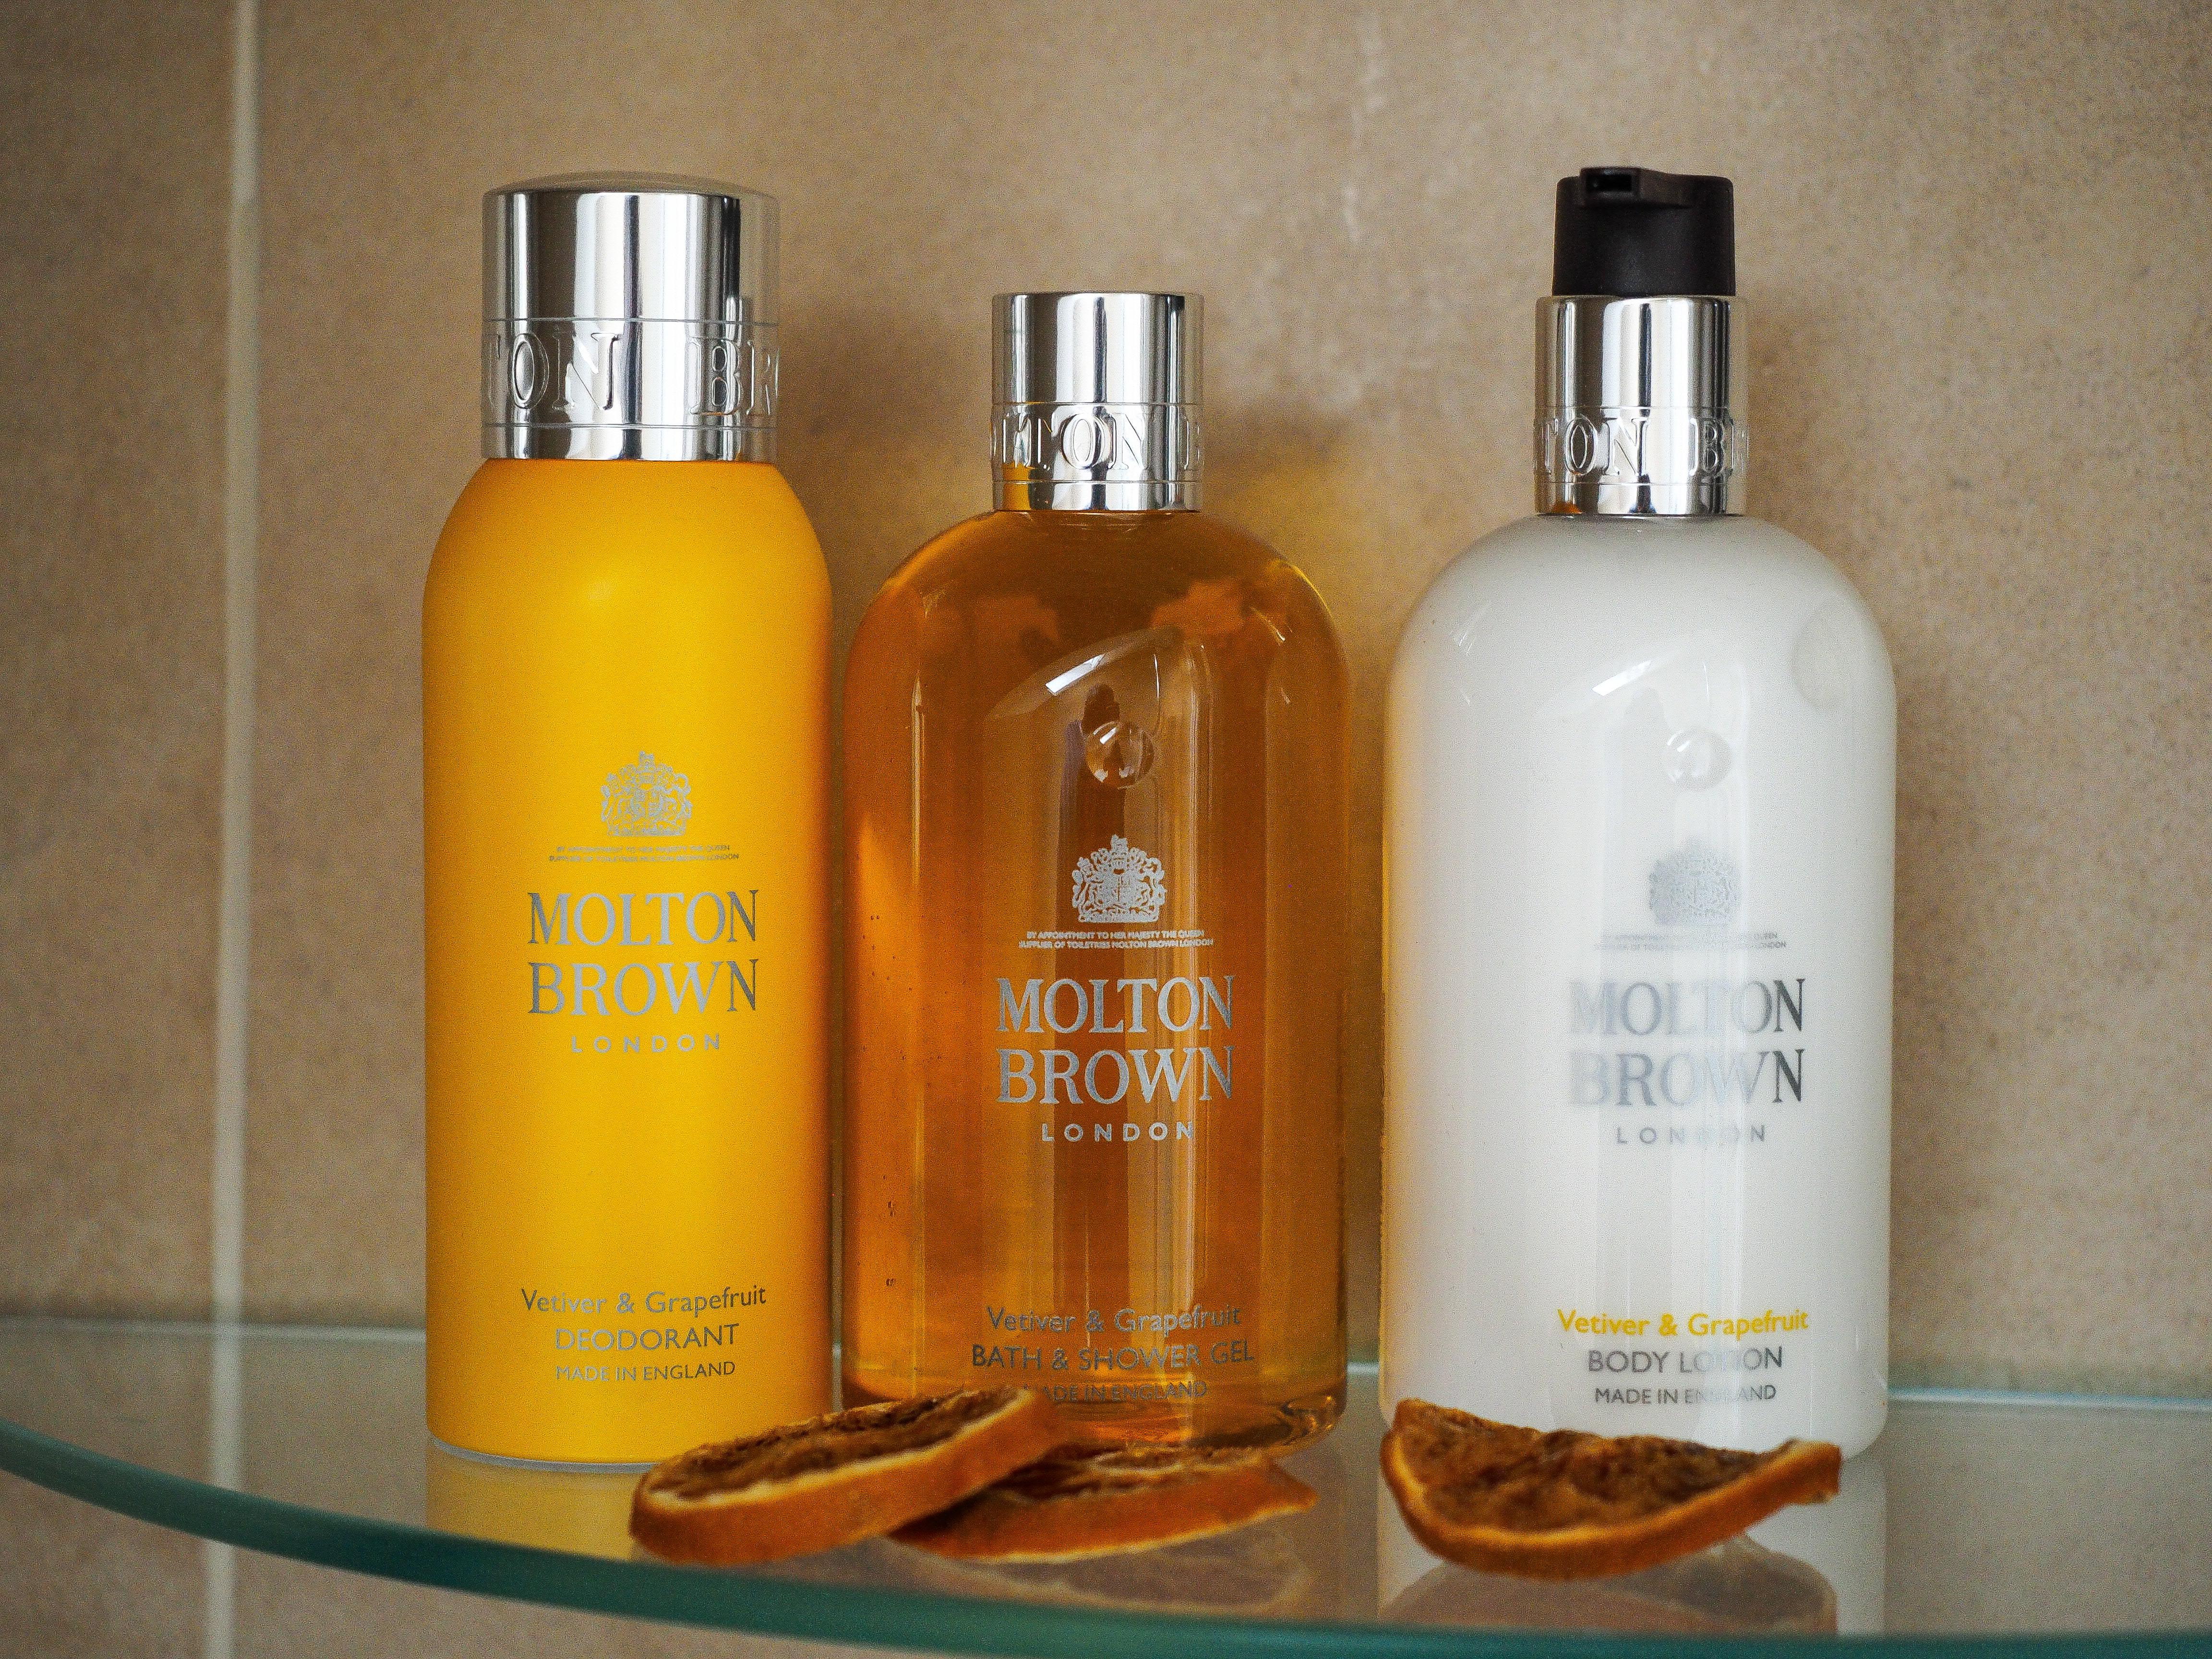 Immersing into Vetiver & grapefruit from Molton Brown